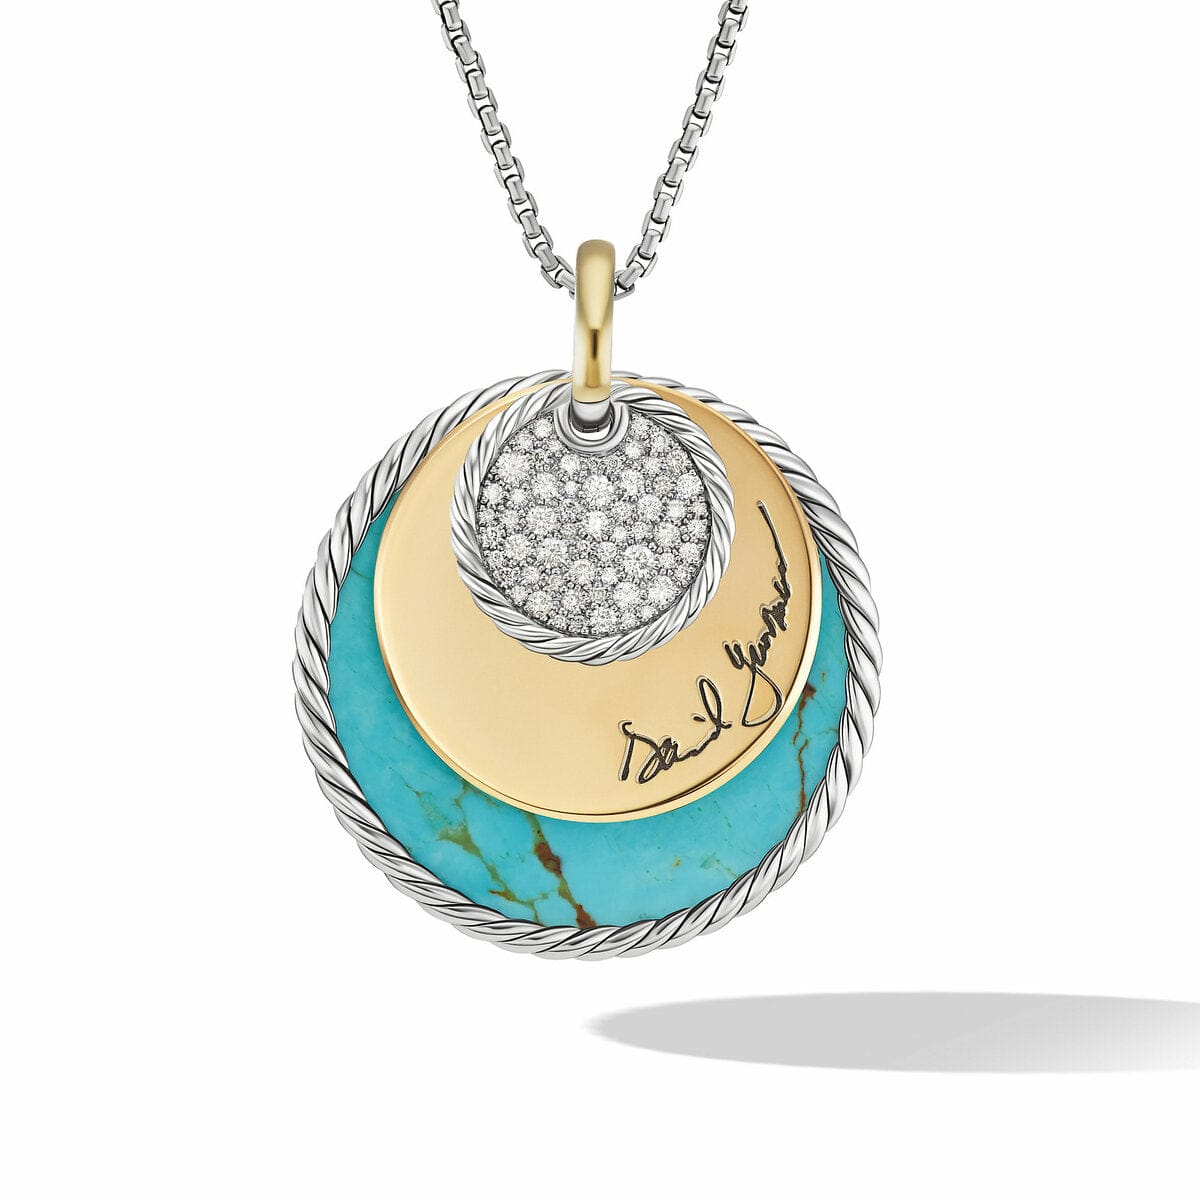 DY Elements® Eclipse Pendant Necklace with Turquoise Reversible to Green Onyx, 18K Yellow Gold and Pavé Diamonds Long's Jewelers